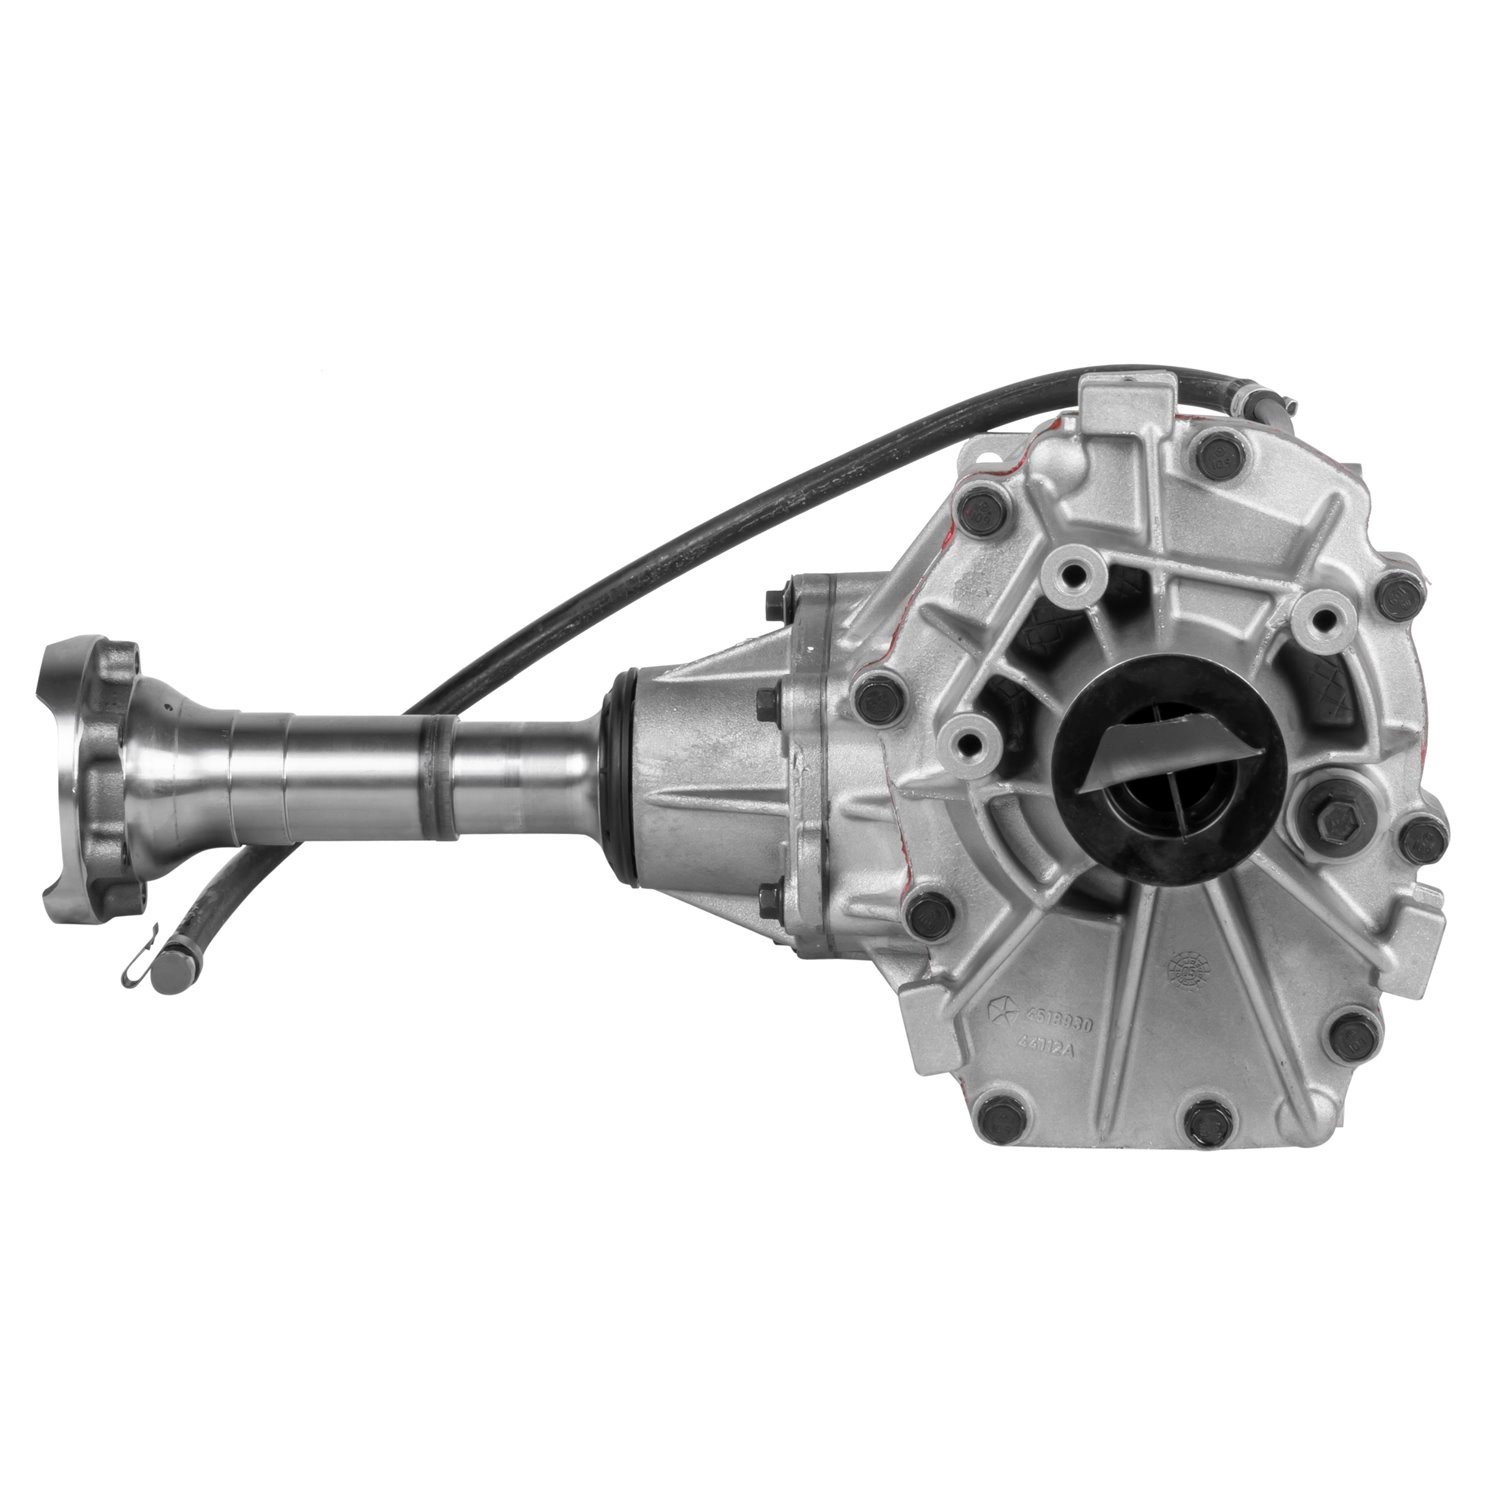 Remanufactured Transfer Case for Chrysler 02-04 Town & Country